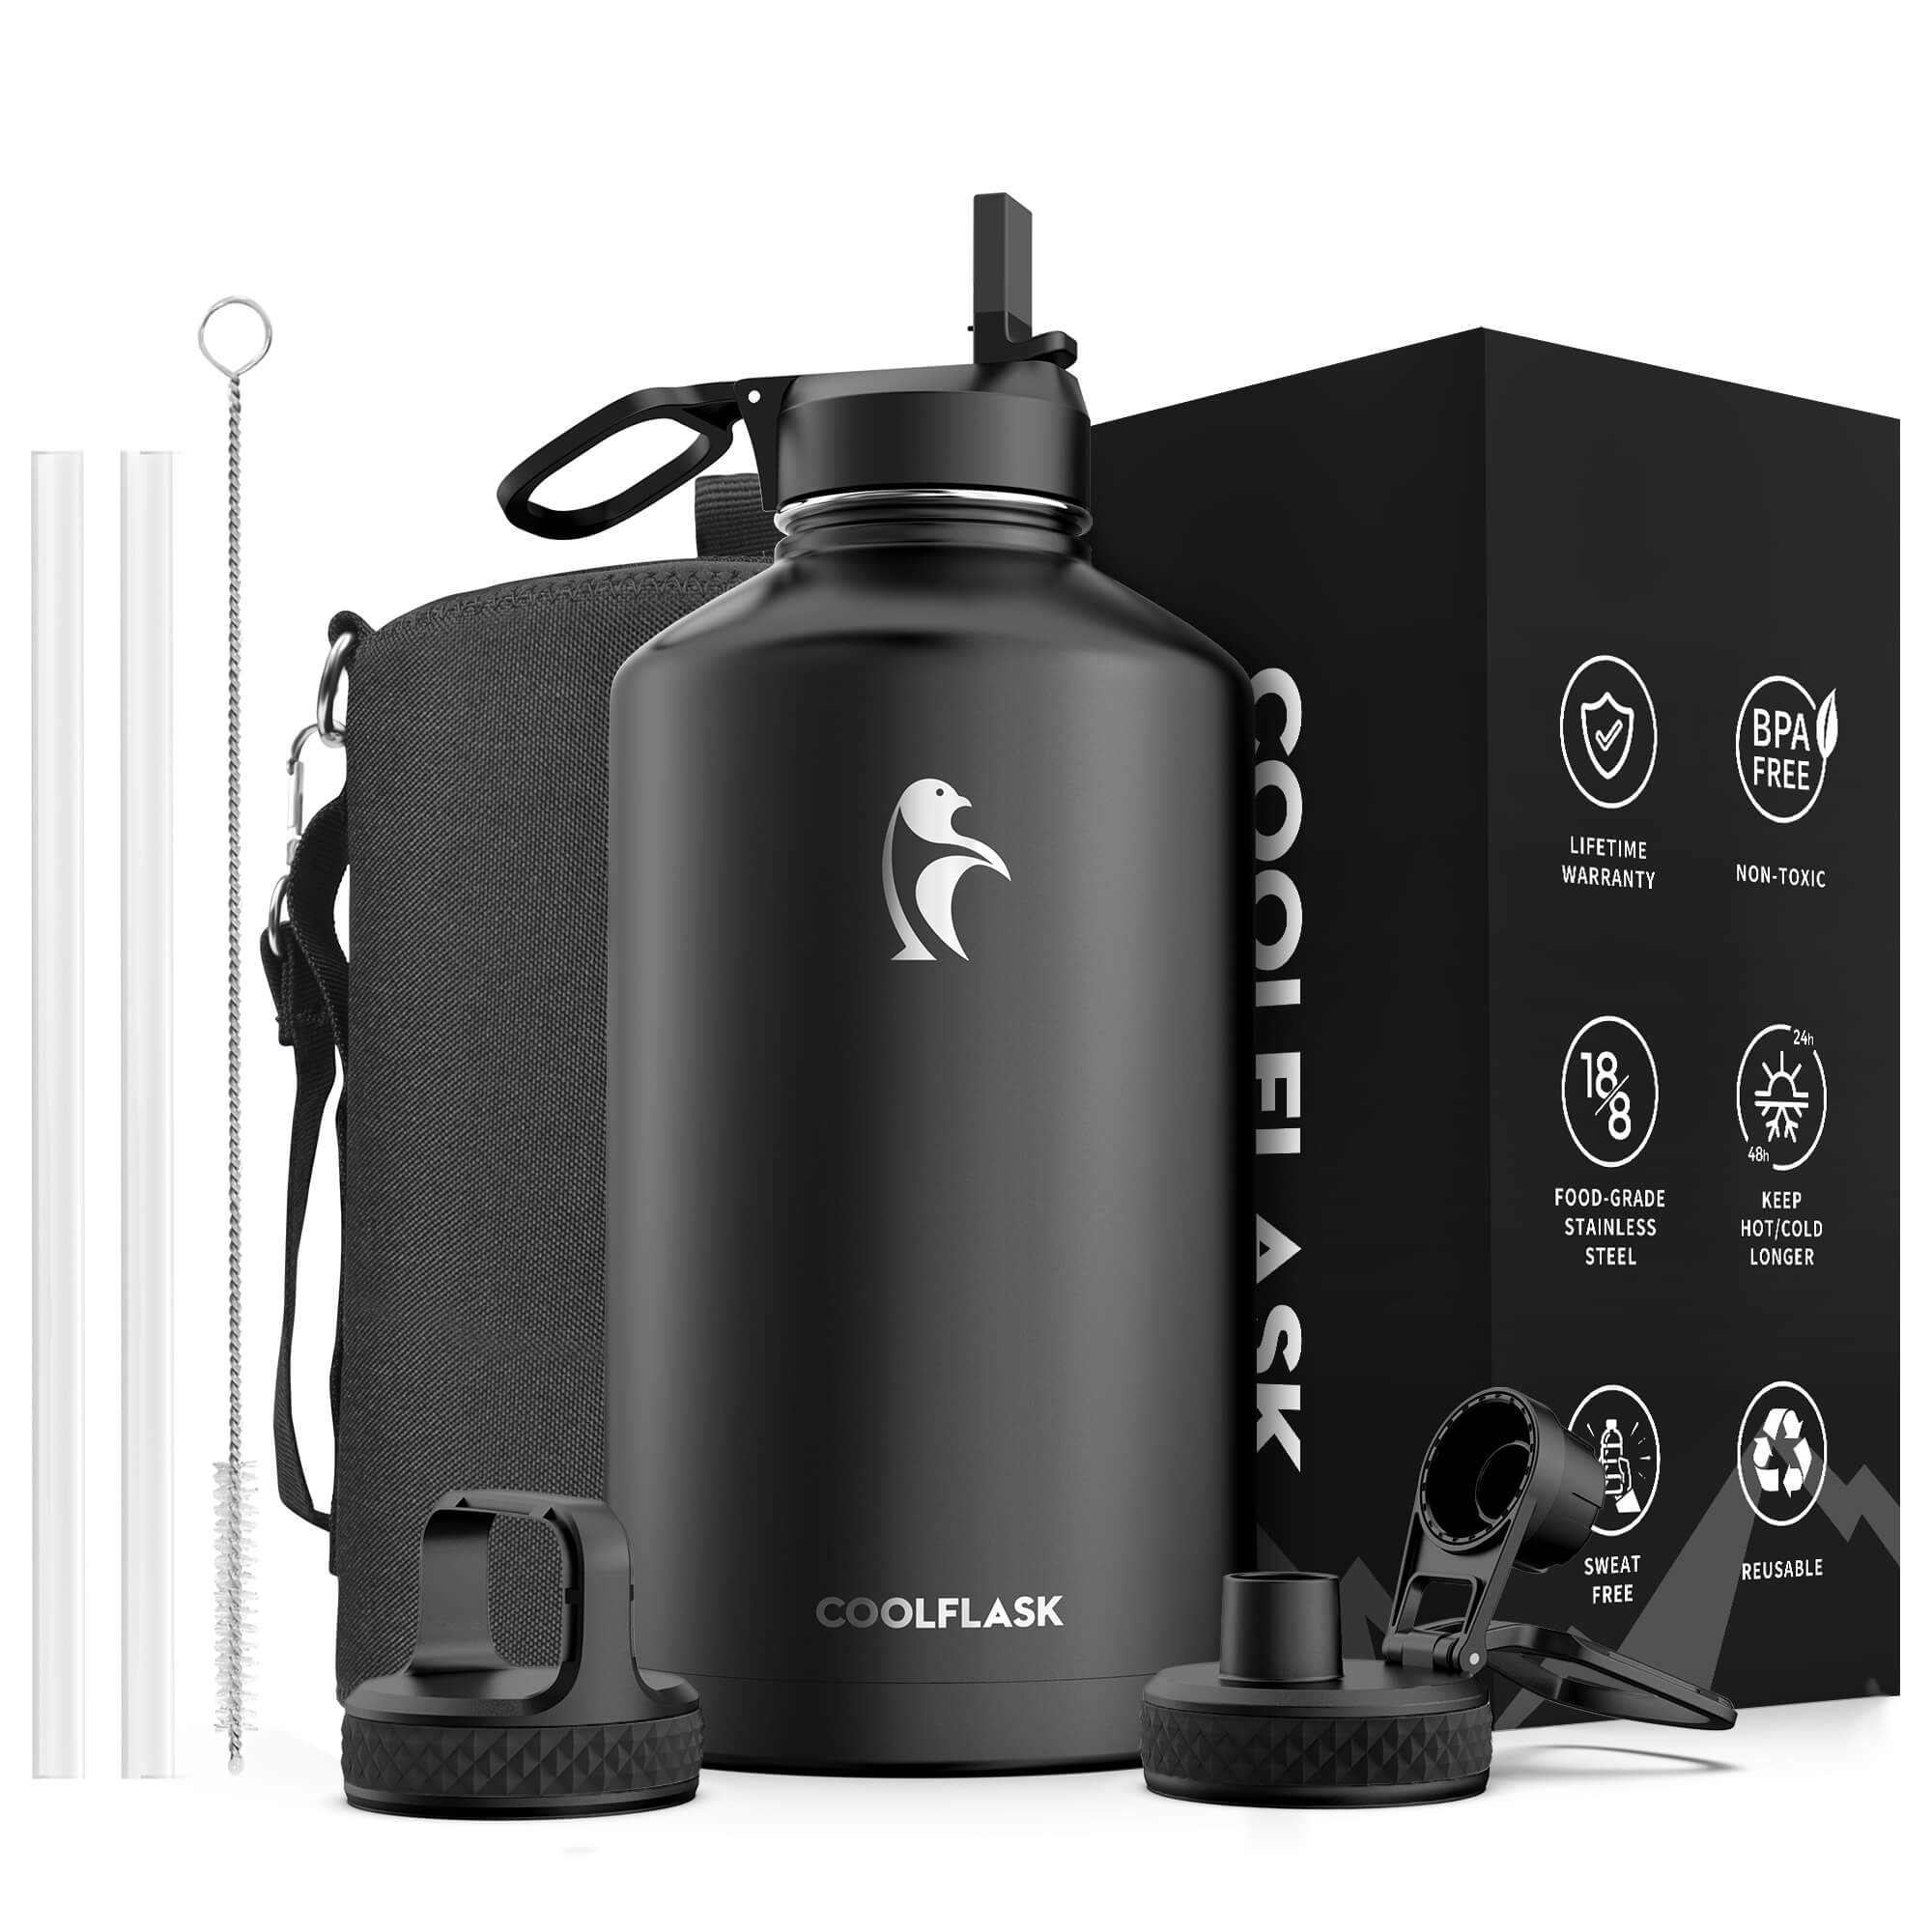 Coolflask Insulated Gallon Water Jug